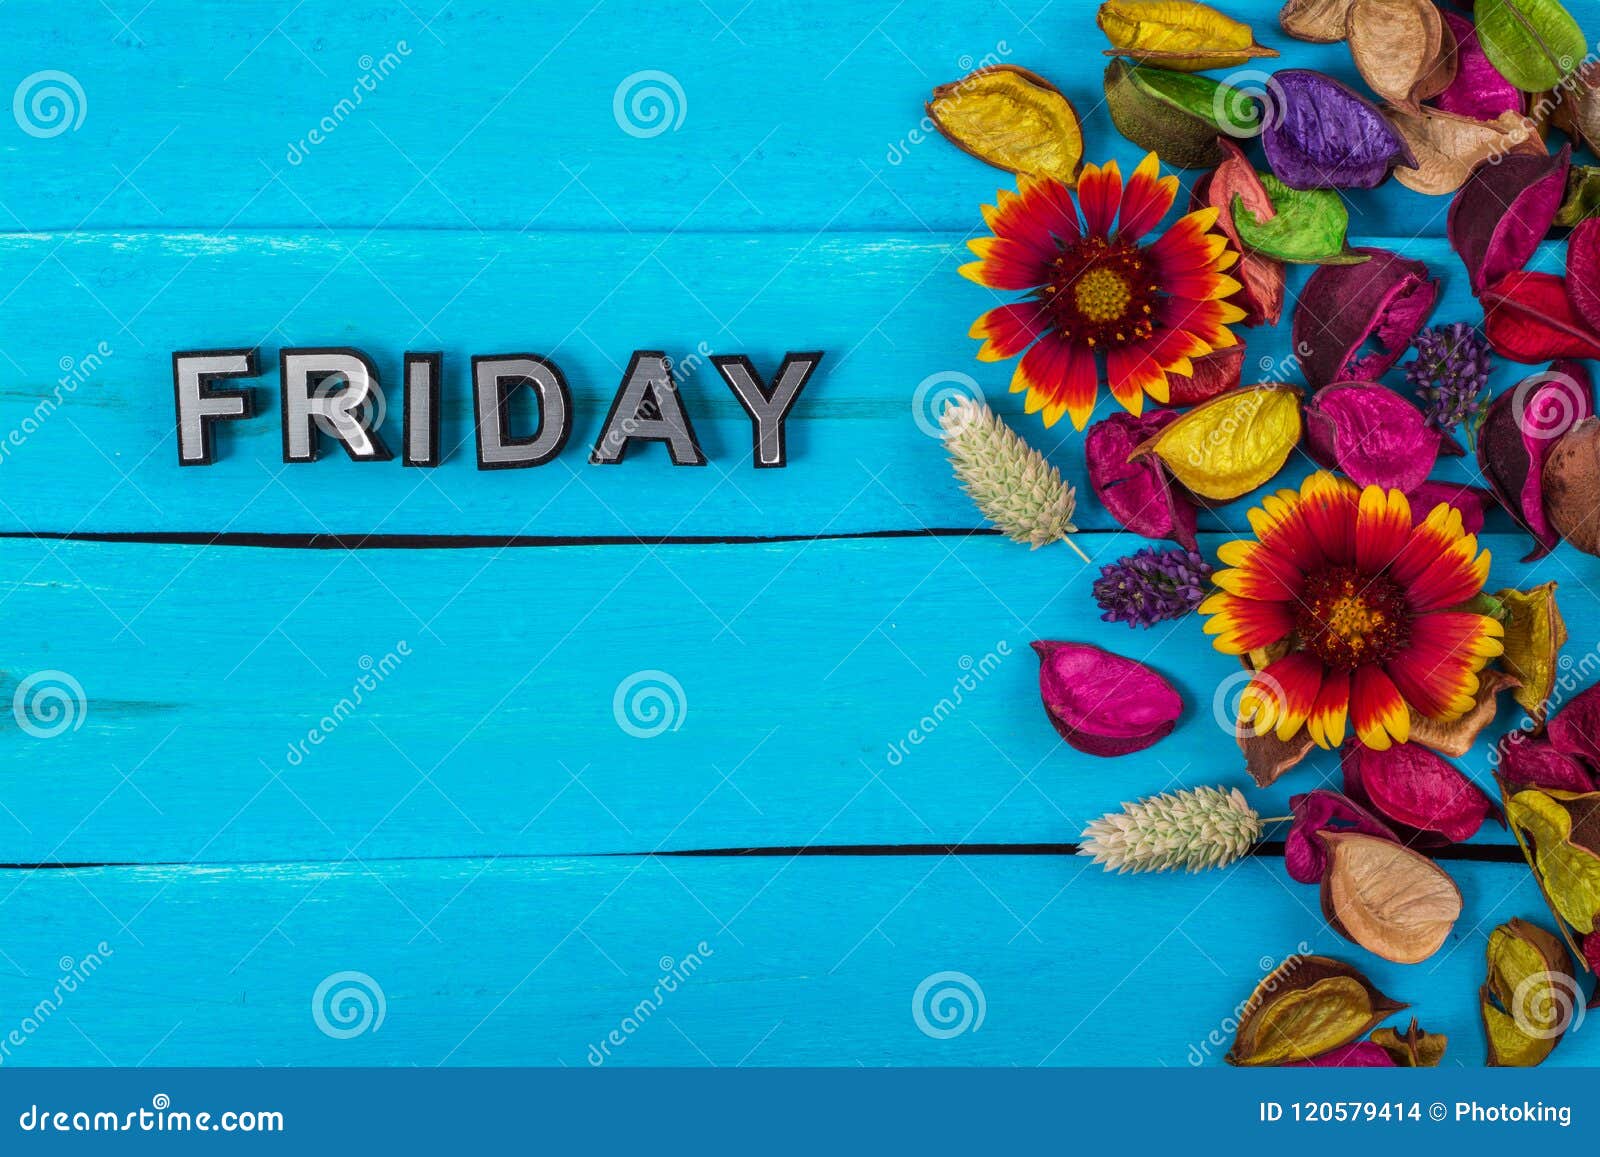 Friday Word on Blue Wood with Flower Stock Photo - Image of bright ...